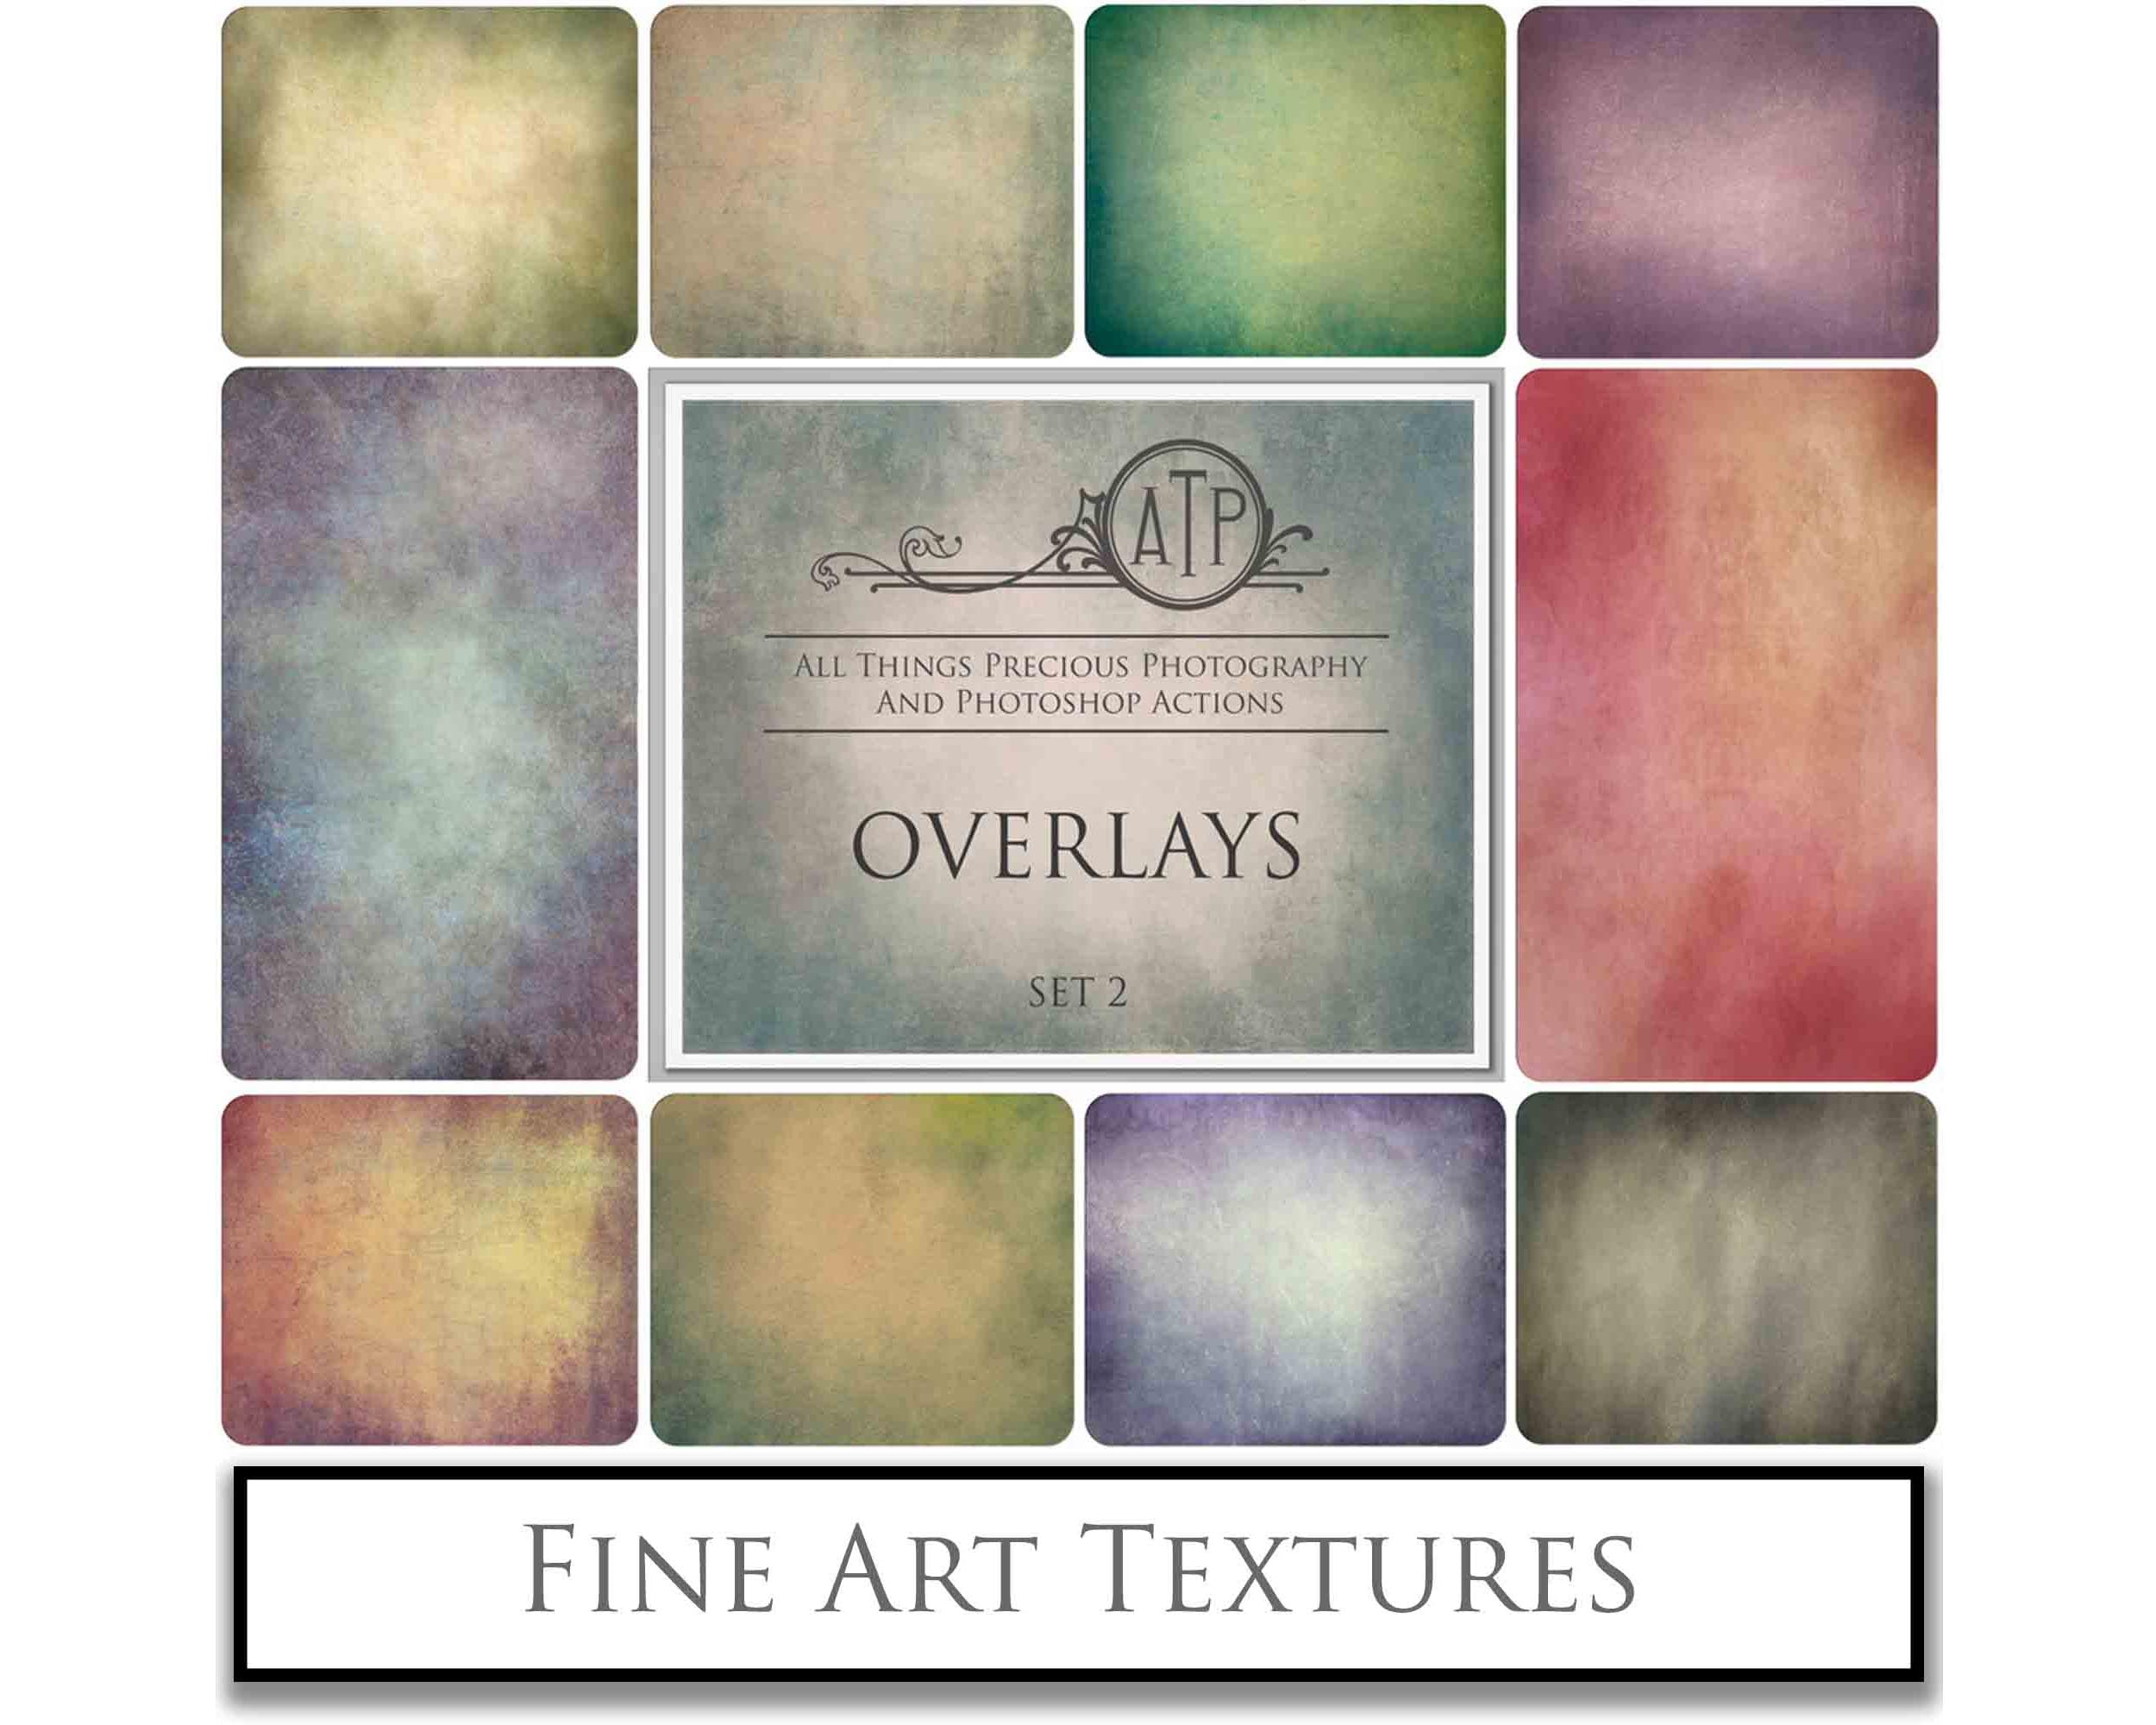 Overlay textures. Fine art texture for photographers, digital editing. Photo Overlays. Antique, Vintage, Grunge, Light, Dark Bundle. Textured printable Canvas, Colour, black and white, Bundle. High resolution, 300dpi Graphic Assets for photography, digital scrapbooking and design. By ATP Textures